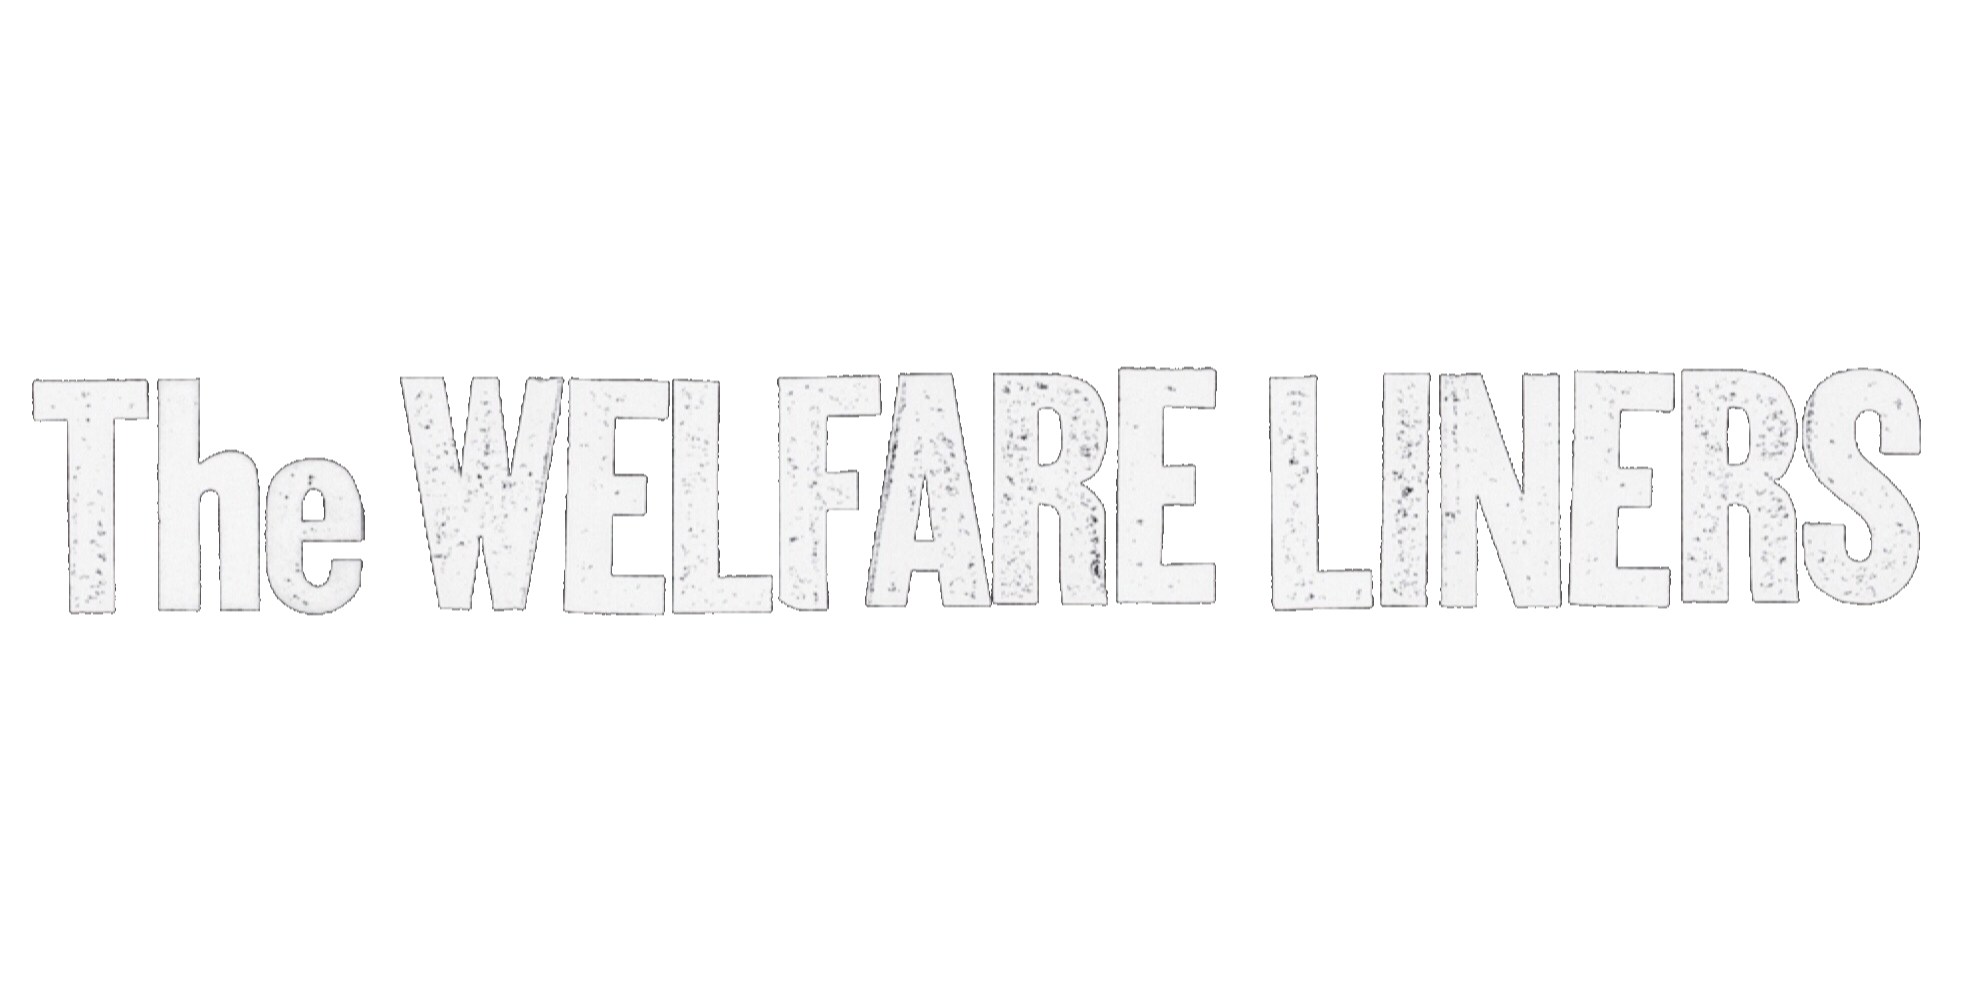 The Welfare Liners